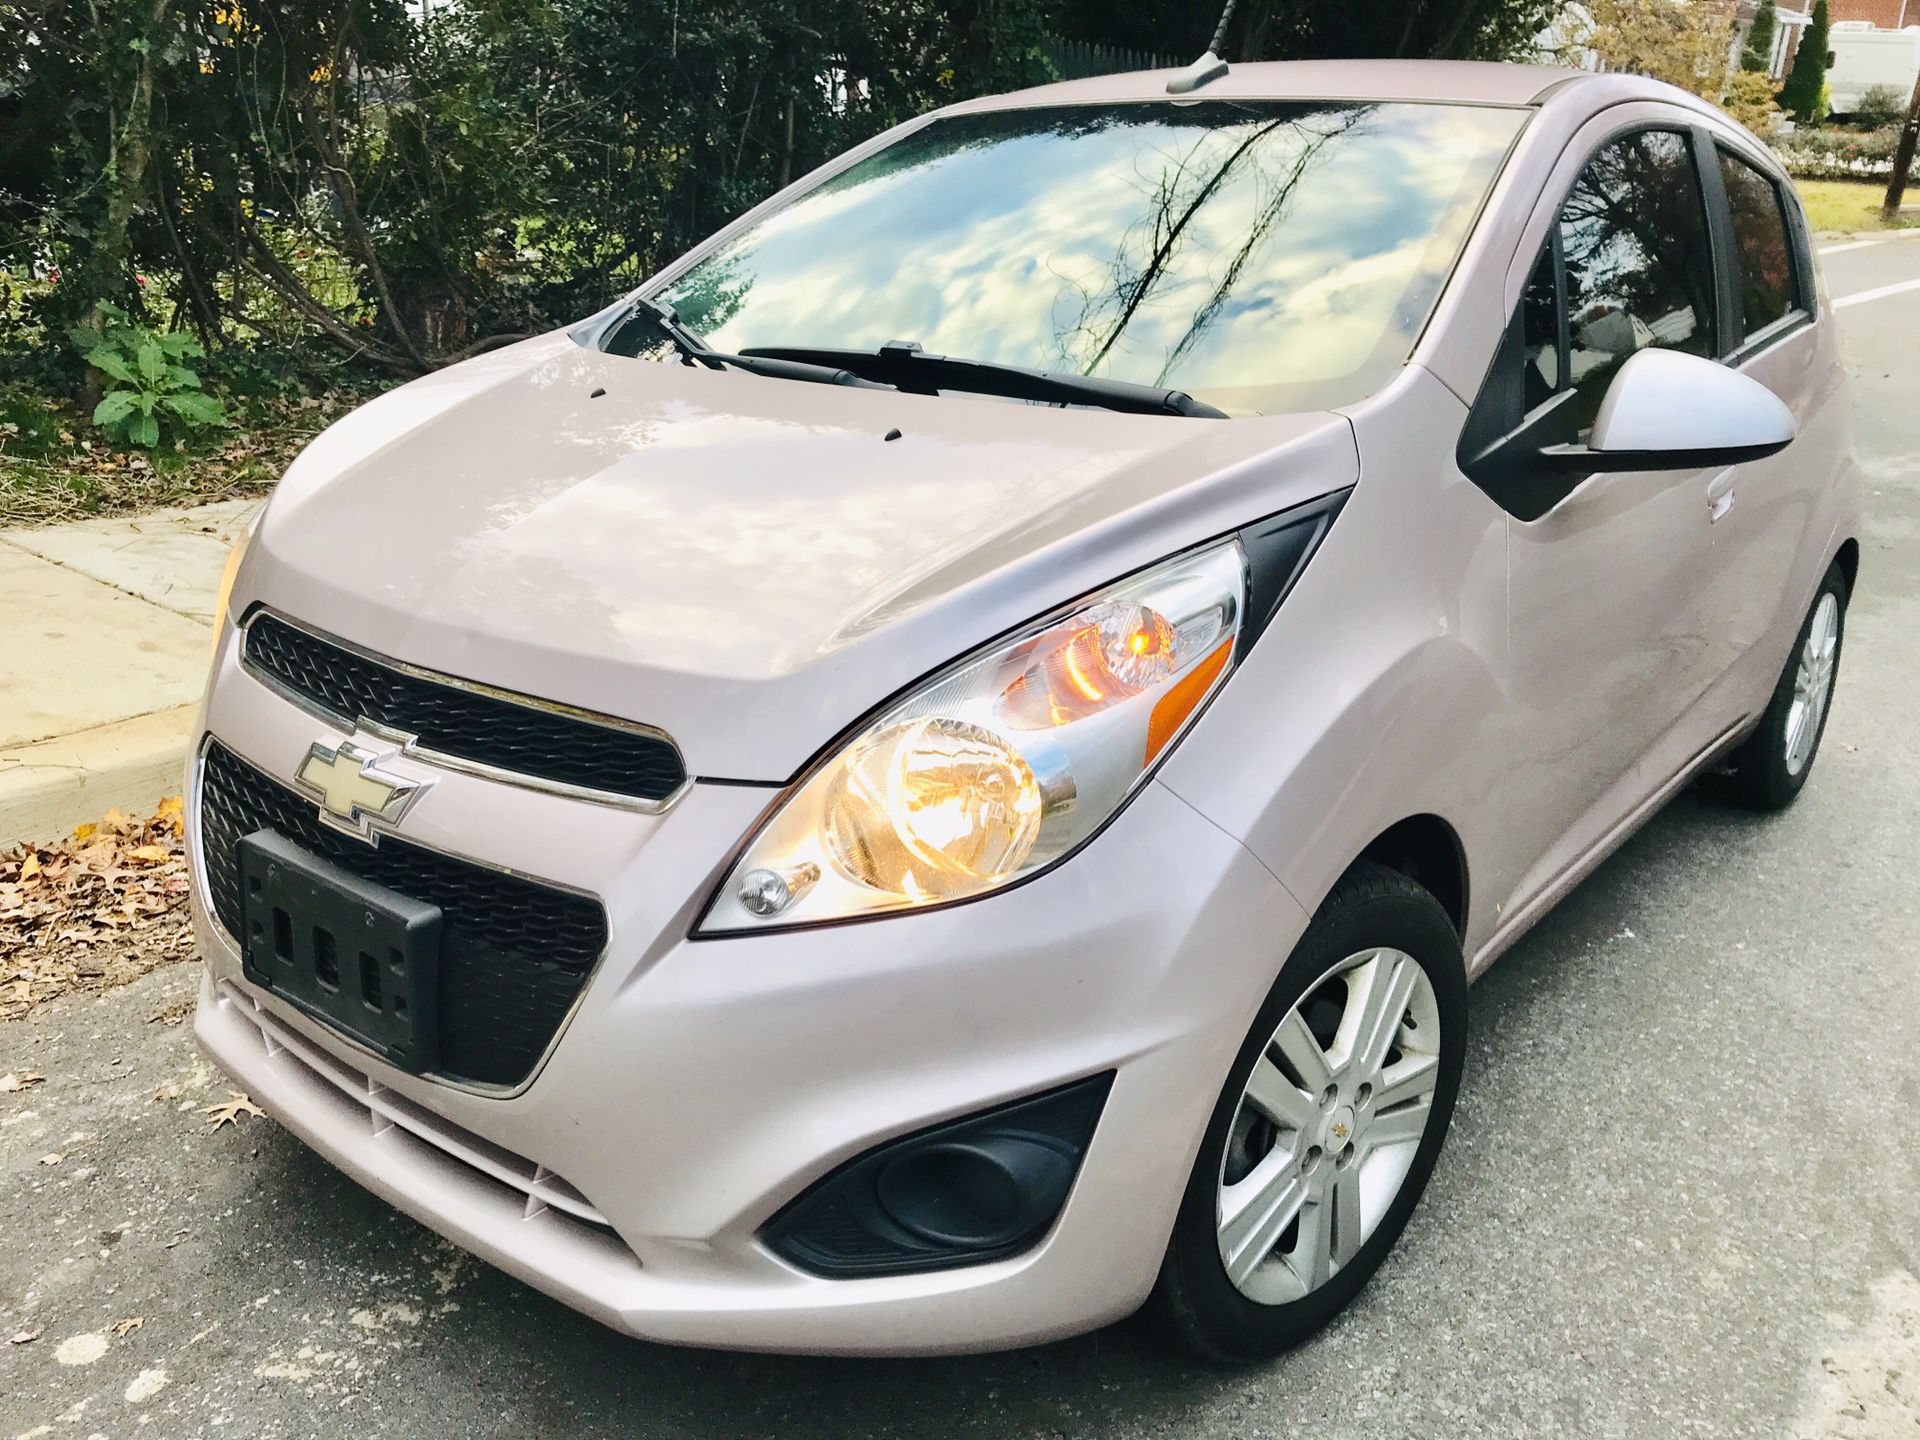 Champagne PINK ** 2013 Chevrolet Spark ** Uber Lyft Ready * Great for a first car ‘ Touch Screen